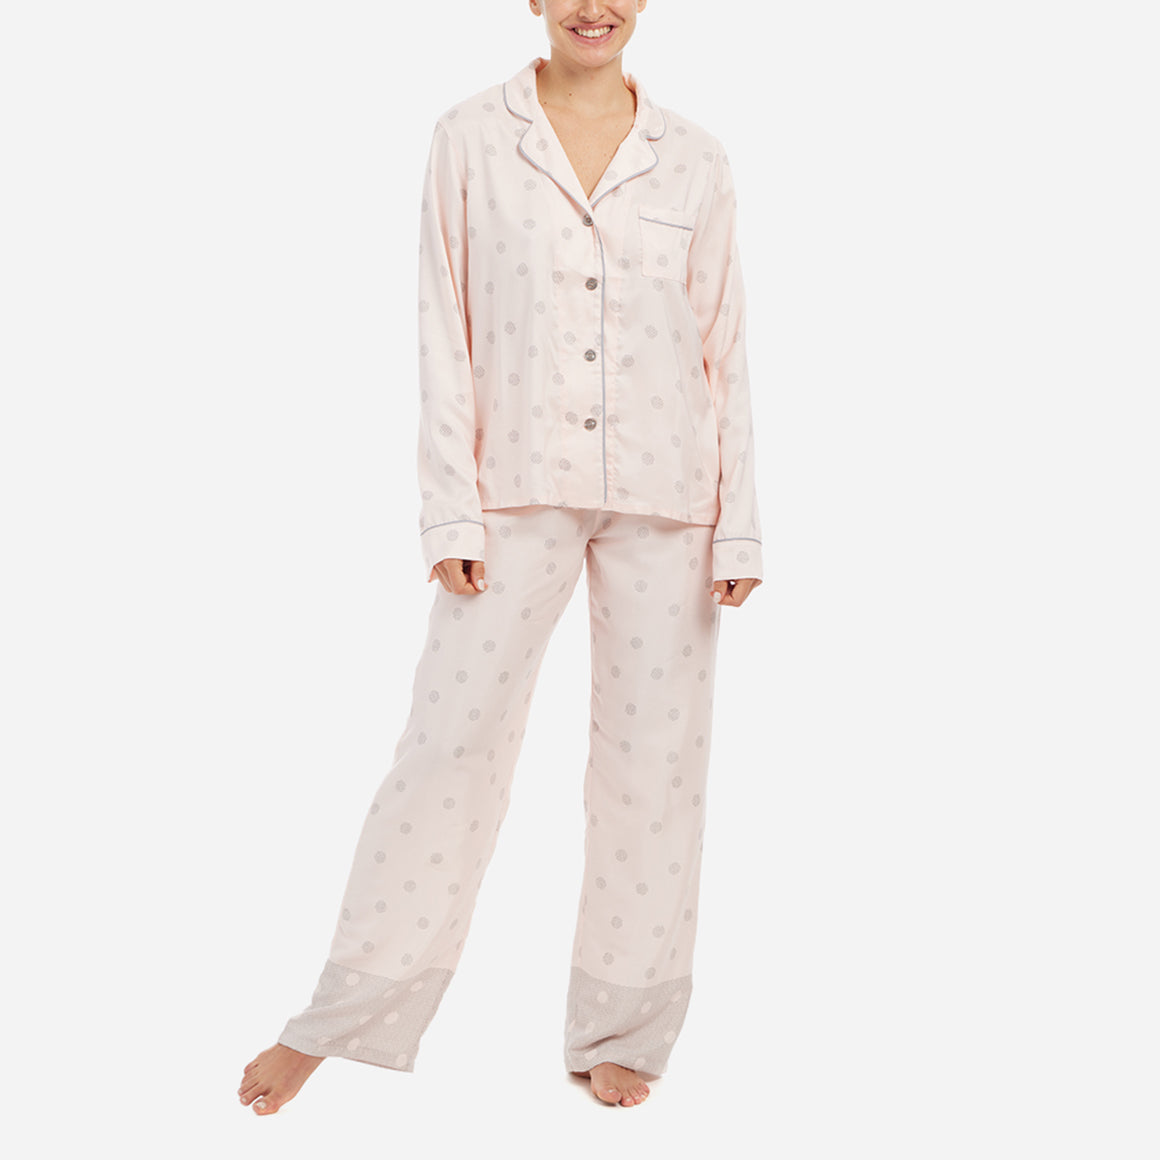 The classic yet contemporary silhouette flatters all body types, and its relaxed fit allows for unrestricted movement and maximum comfort, ensuring you wake up feeling refreshed and rejuvenated. The button-down top exudes sophistication, while the notched collar adds a touch of refinement. The matching straight leg pants offer a modern and flattering look, while the elastic waistband provides a customized fit.